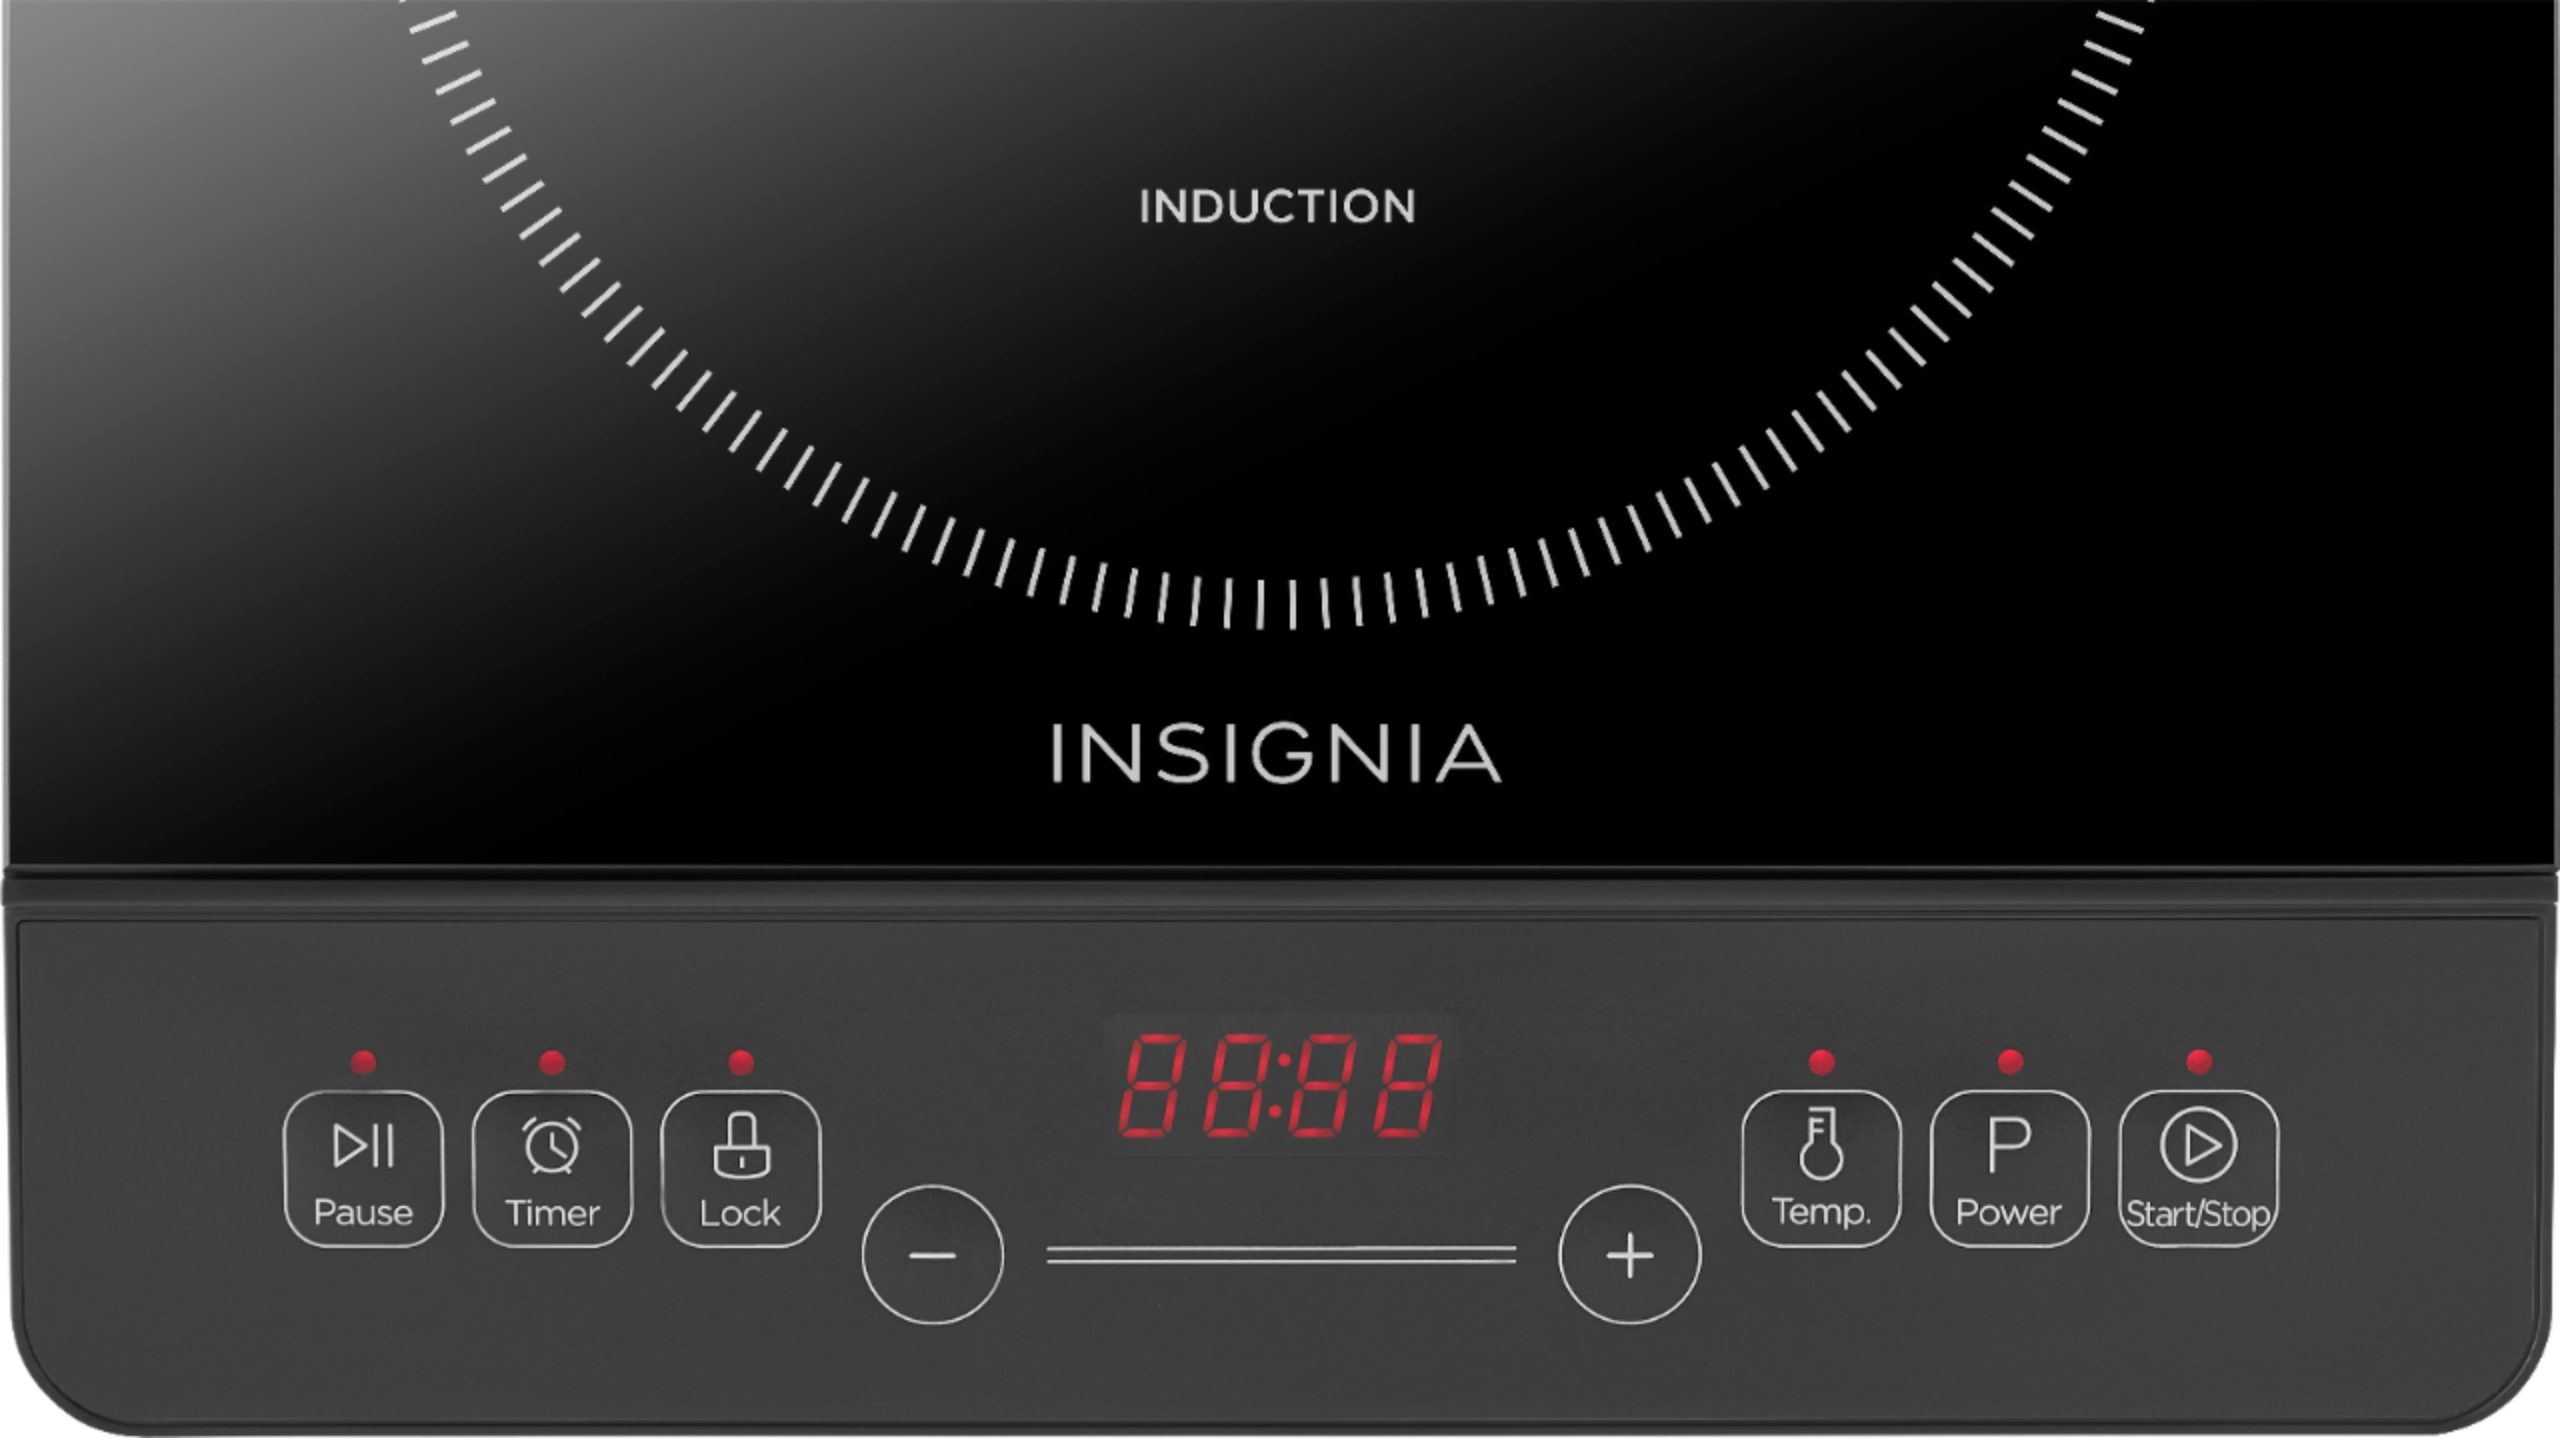 Insignia™ – Single-Zone Induction Cooktop – Black – Just $39.99 at Best Buy